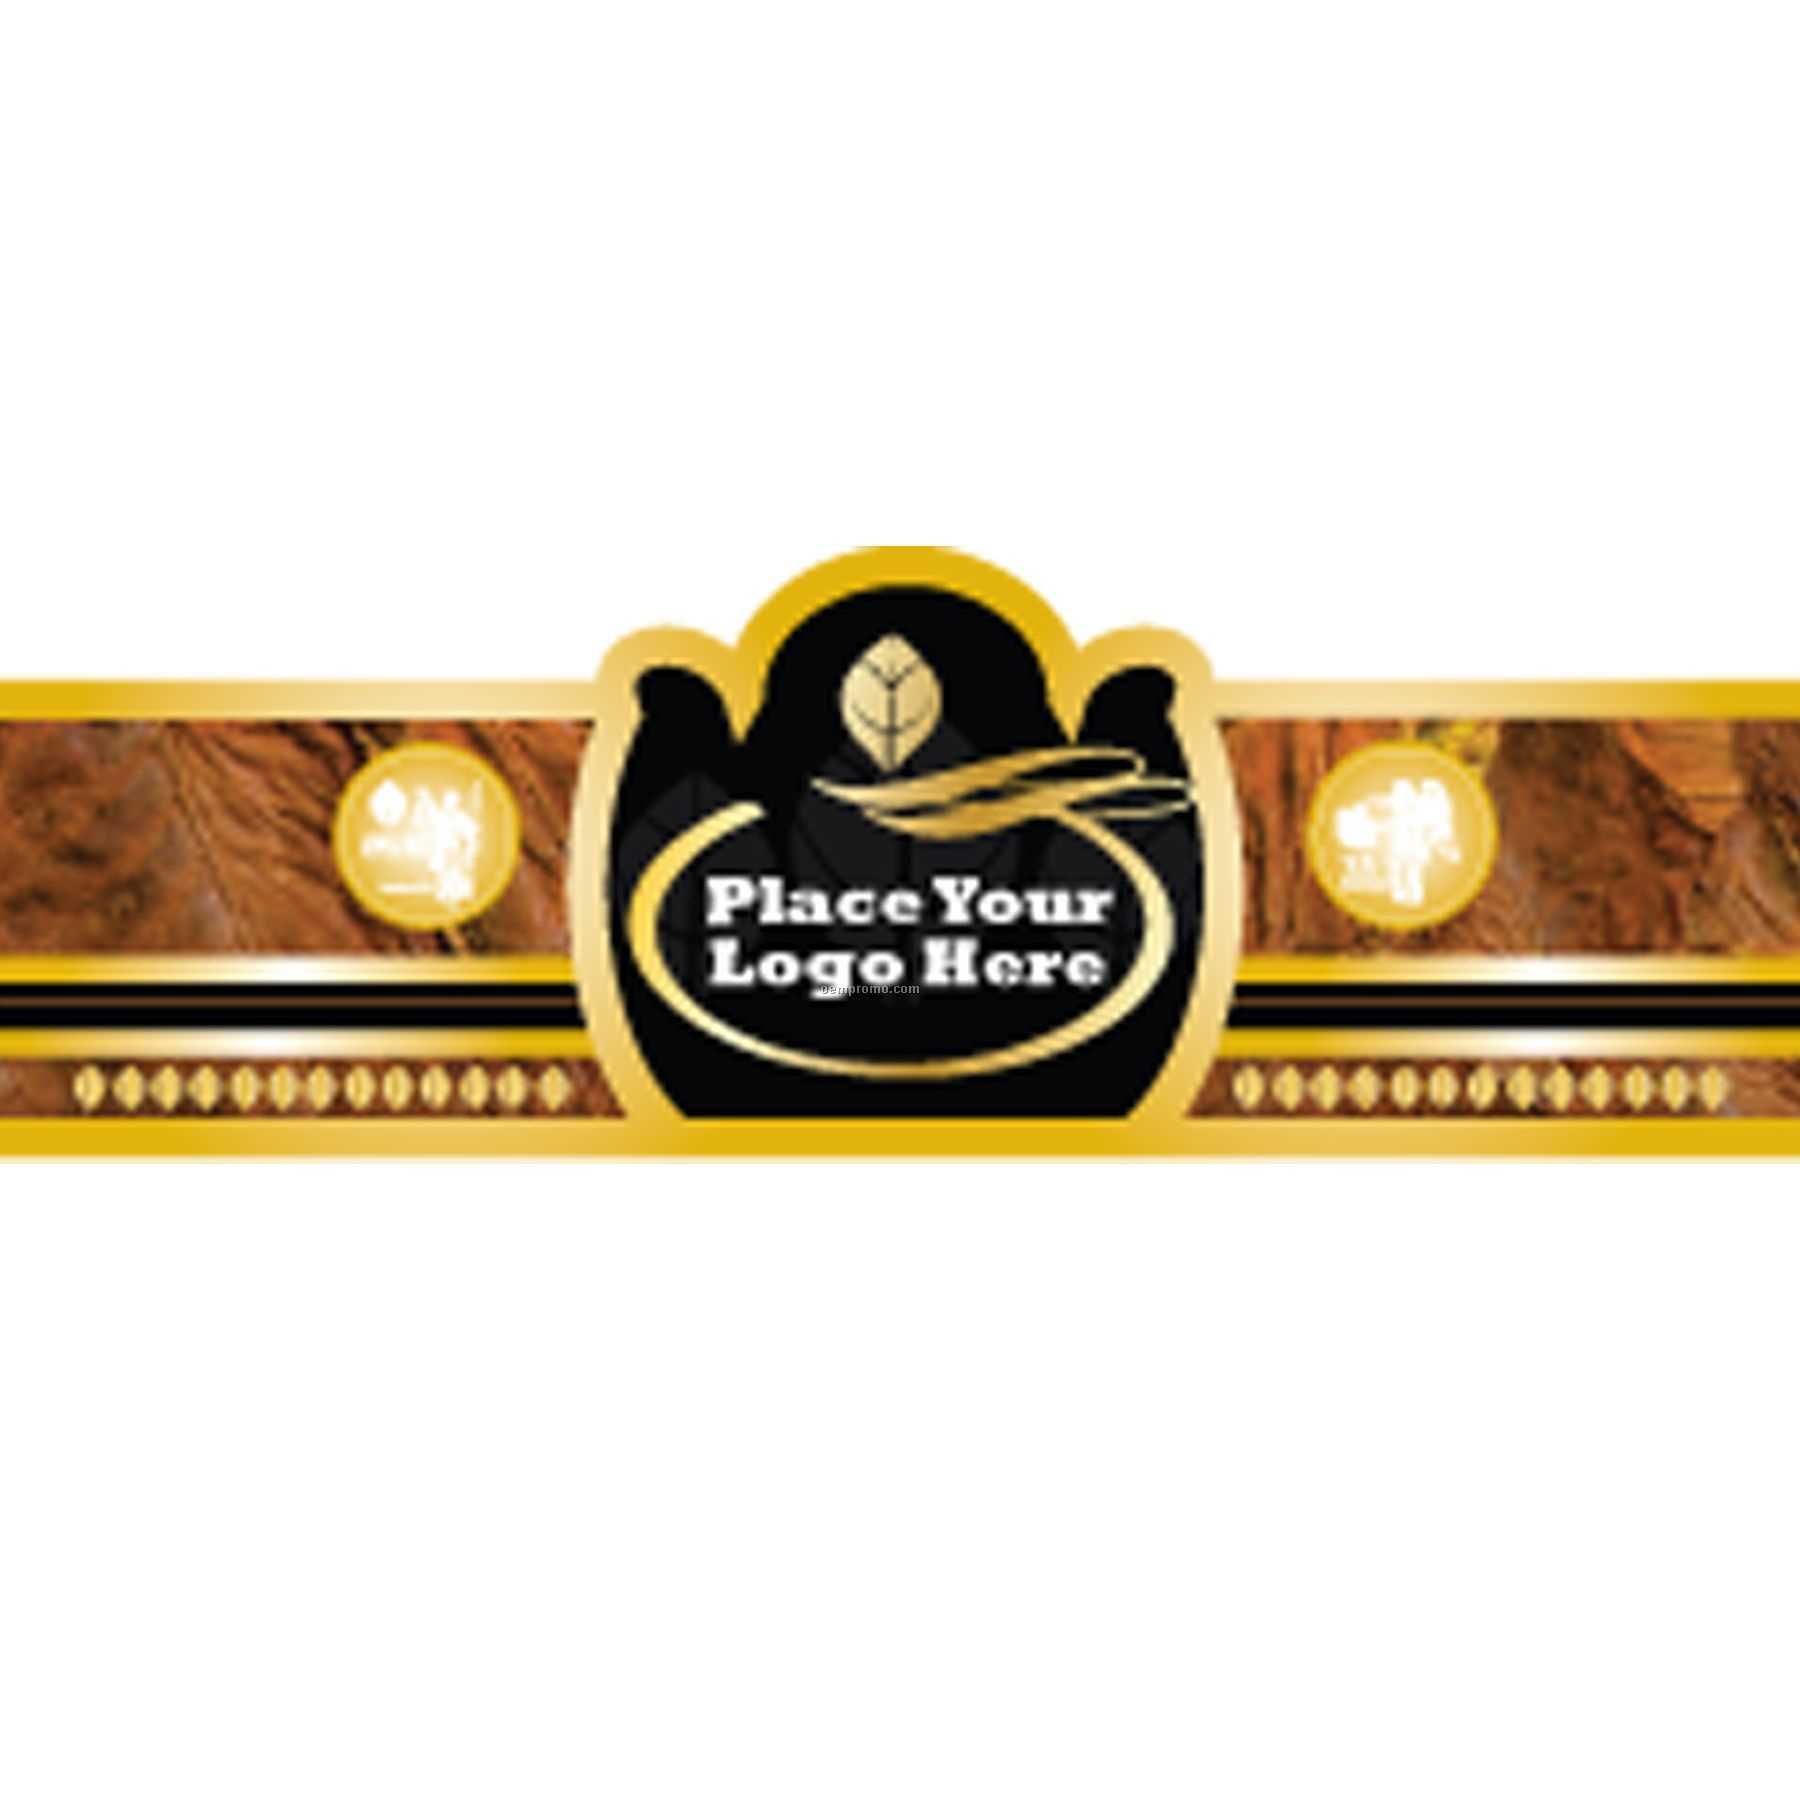 Full Color Cigar Label On In Stock Template,china Wholesale Intended For Cigar Label Template